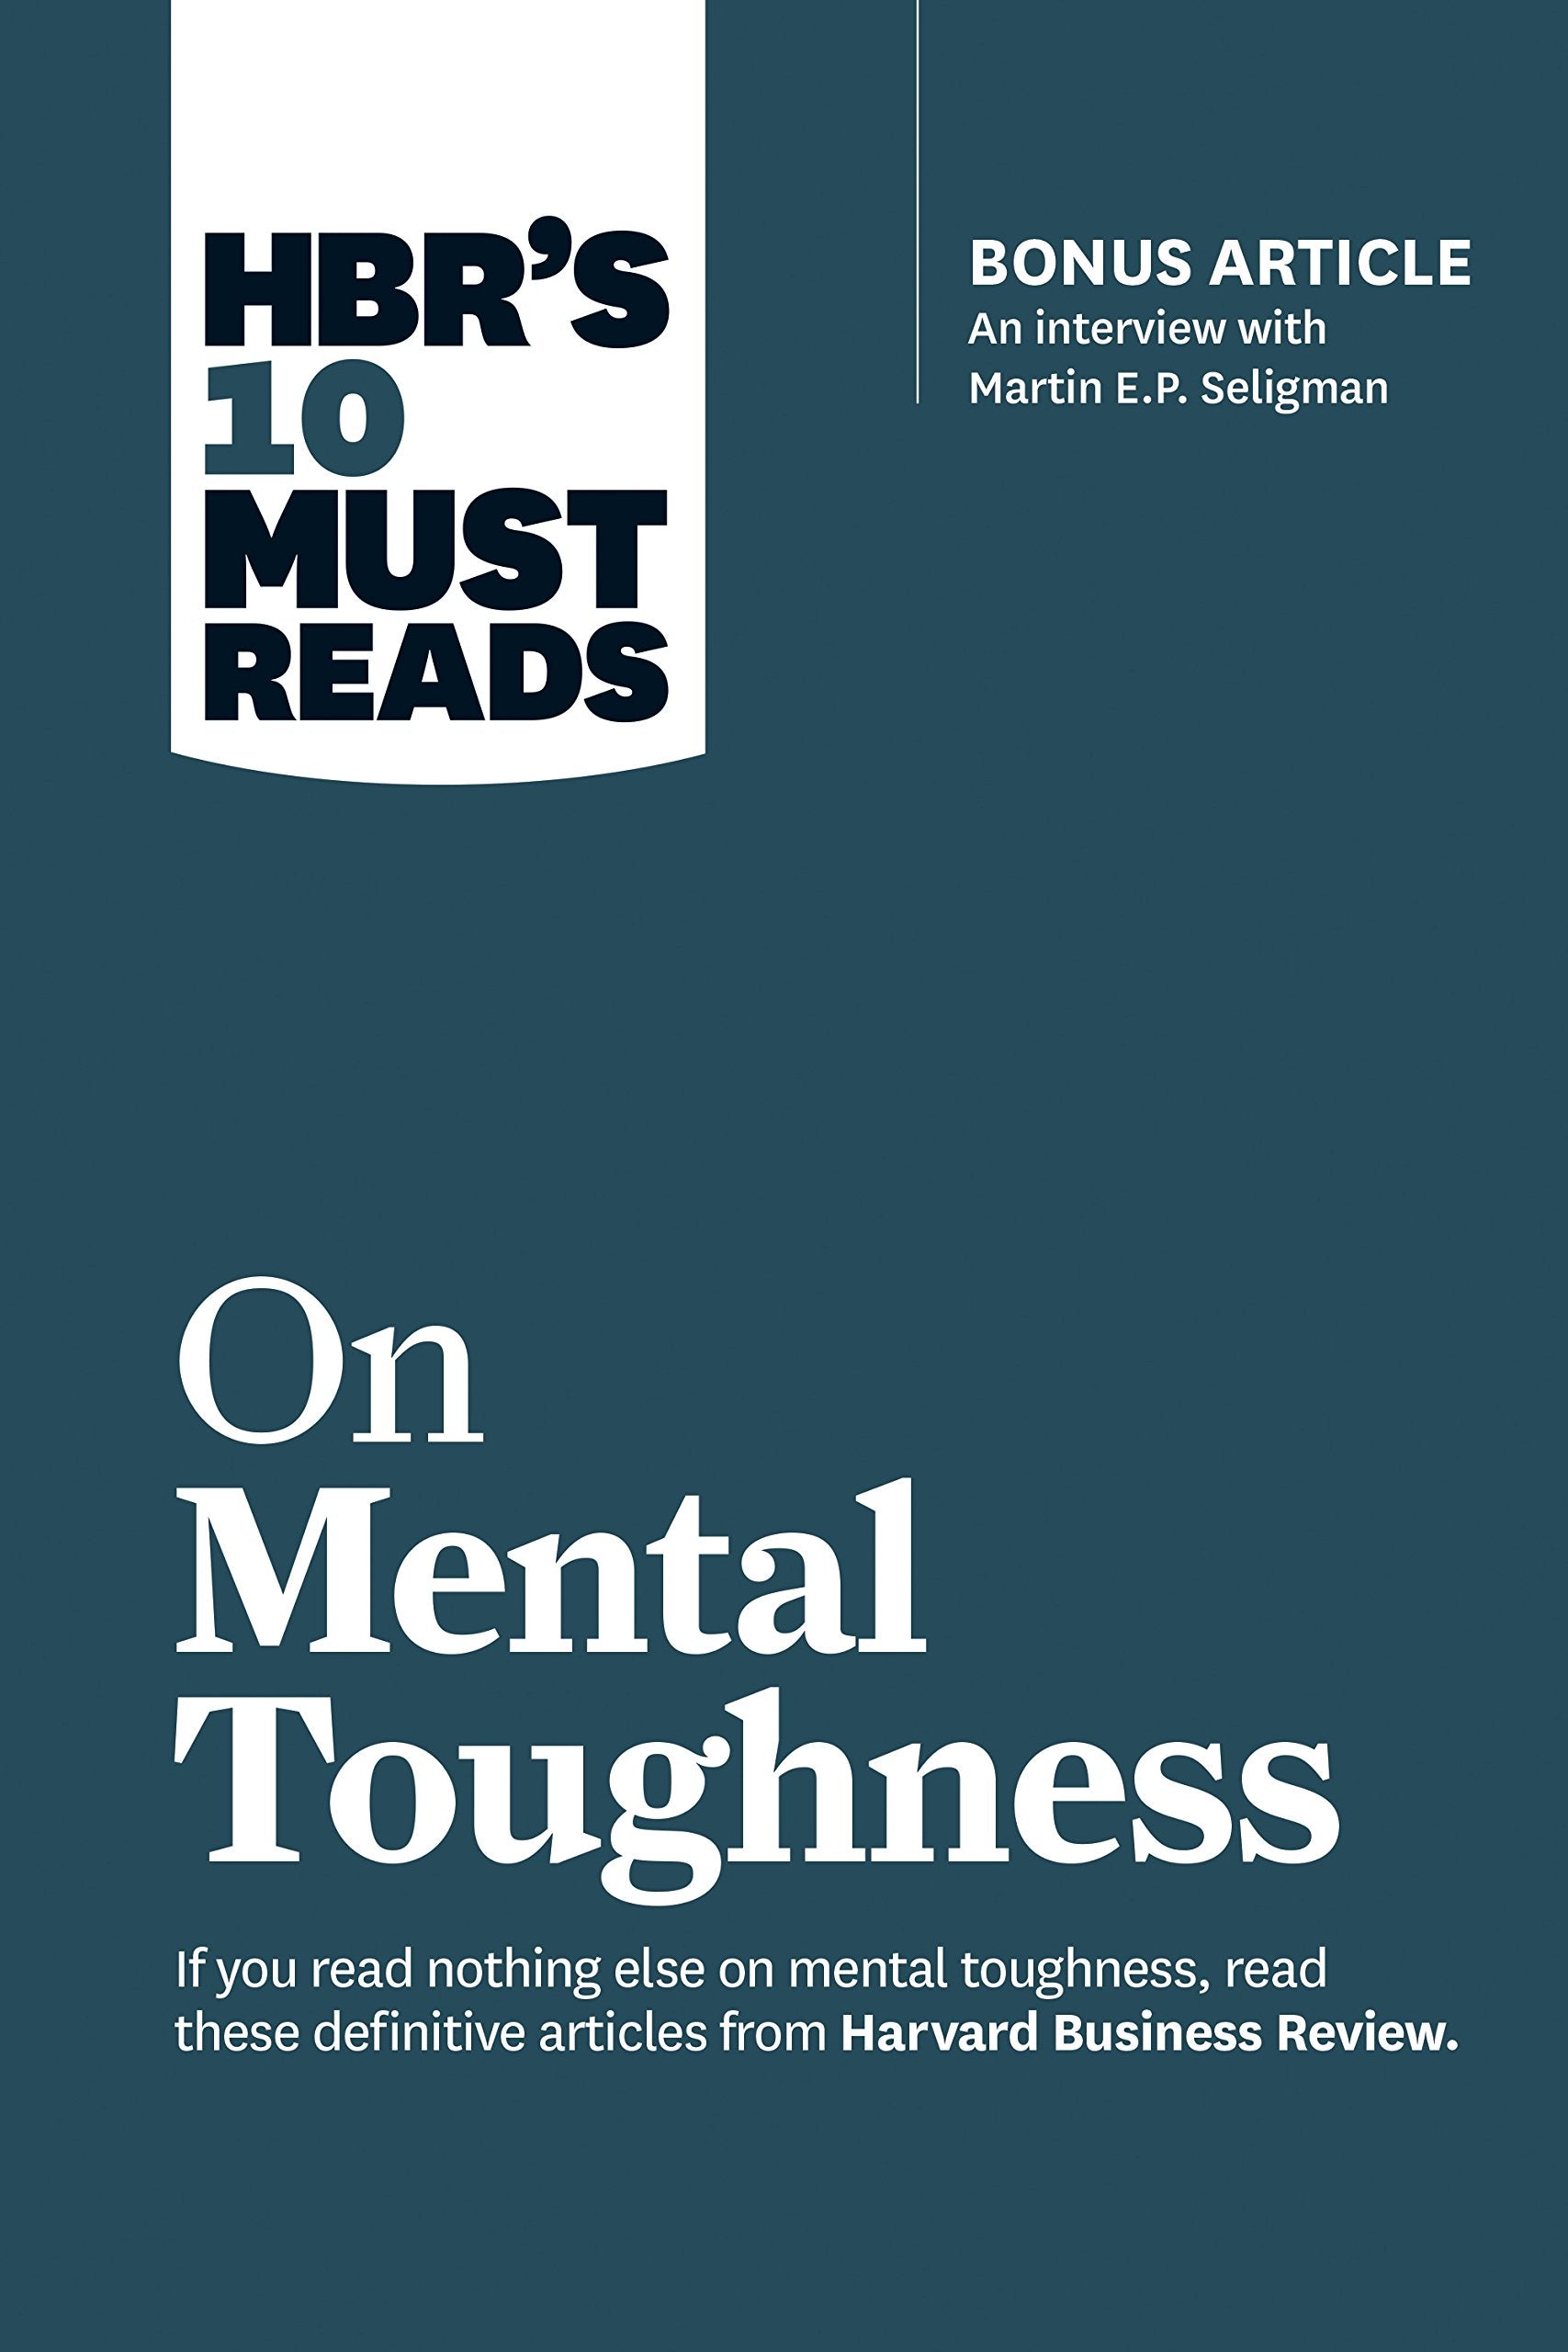 HBRs 10 Must Reads on Mental Toughness